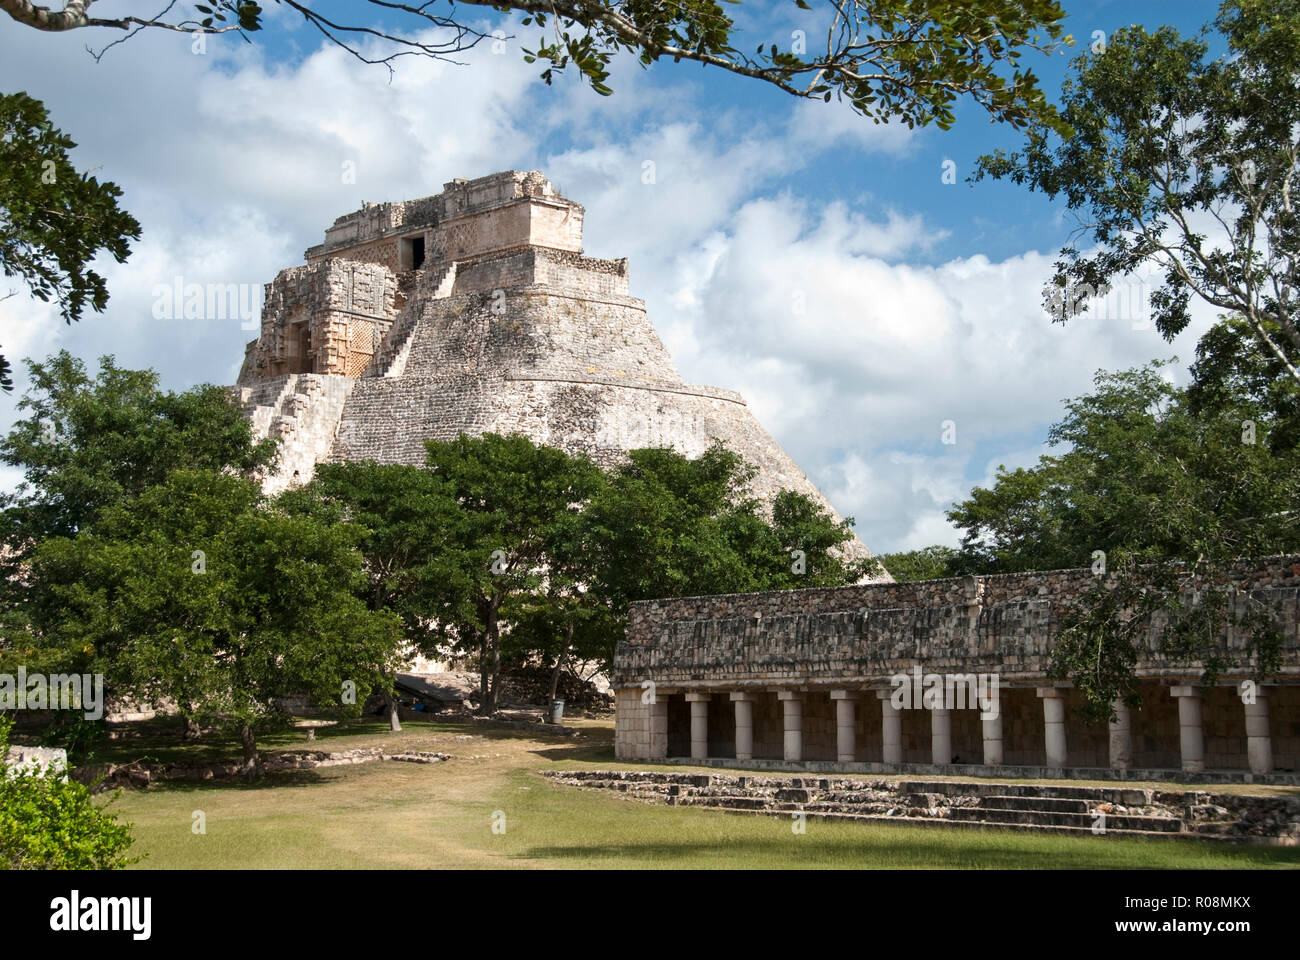 The Pyramid of the Magician (Piramide del Adivino) and a small, courtyard building in the Mayan city of Uxmal, Mexico. Stock Photo